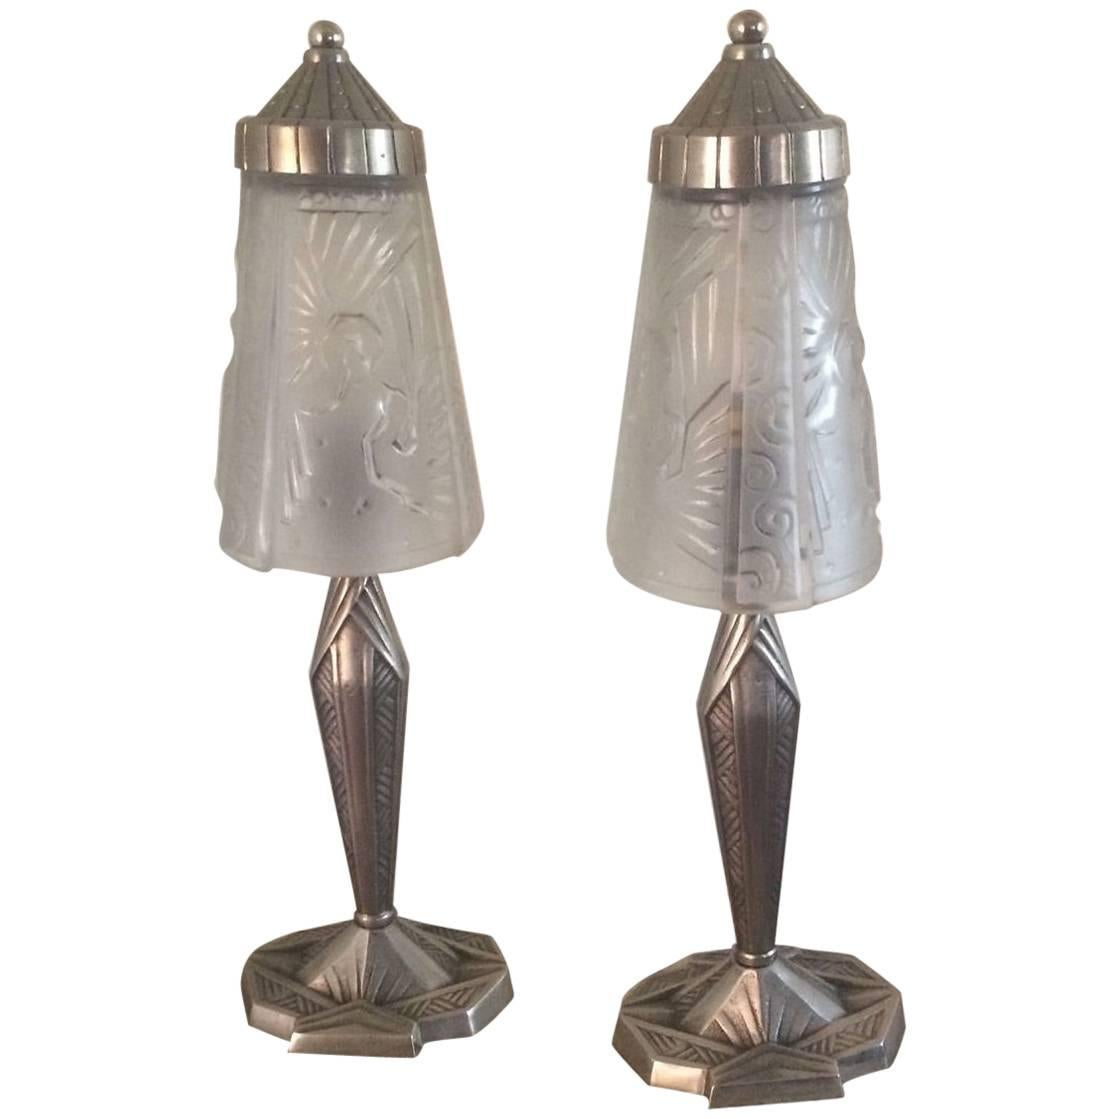 Rare Pair of Art Deco French Muller Fres Bedside Lamps 